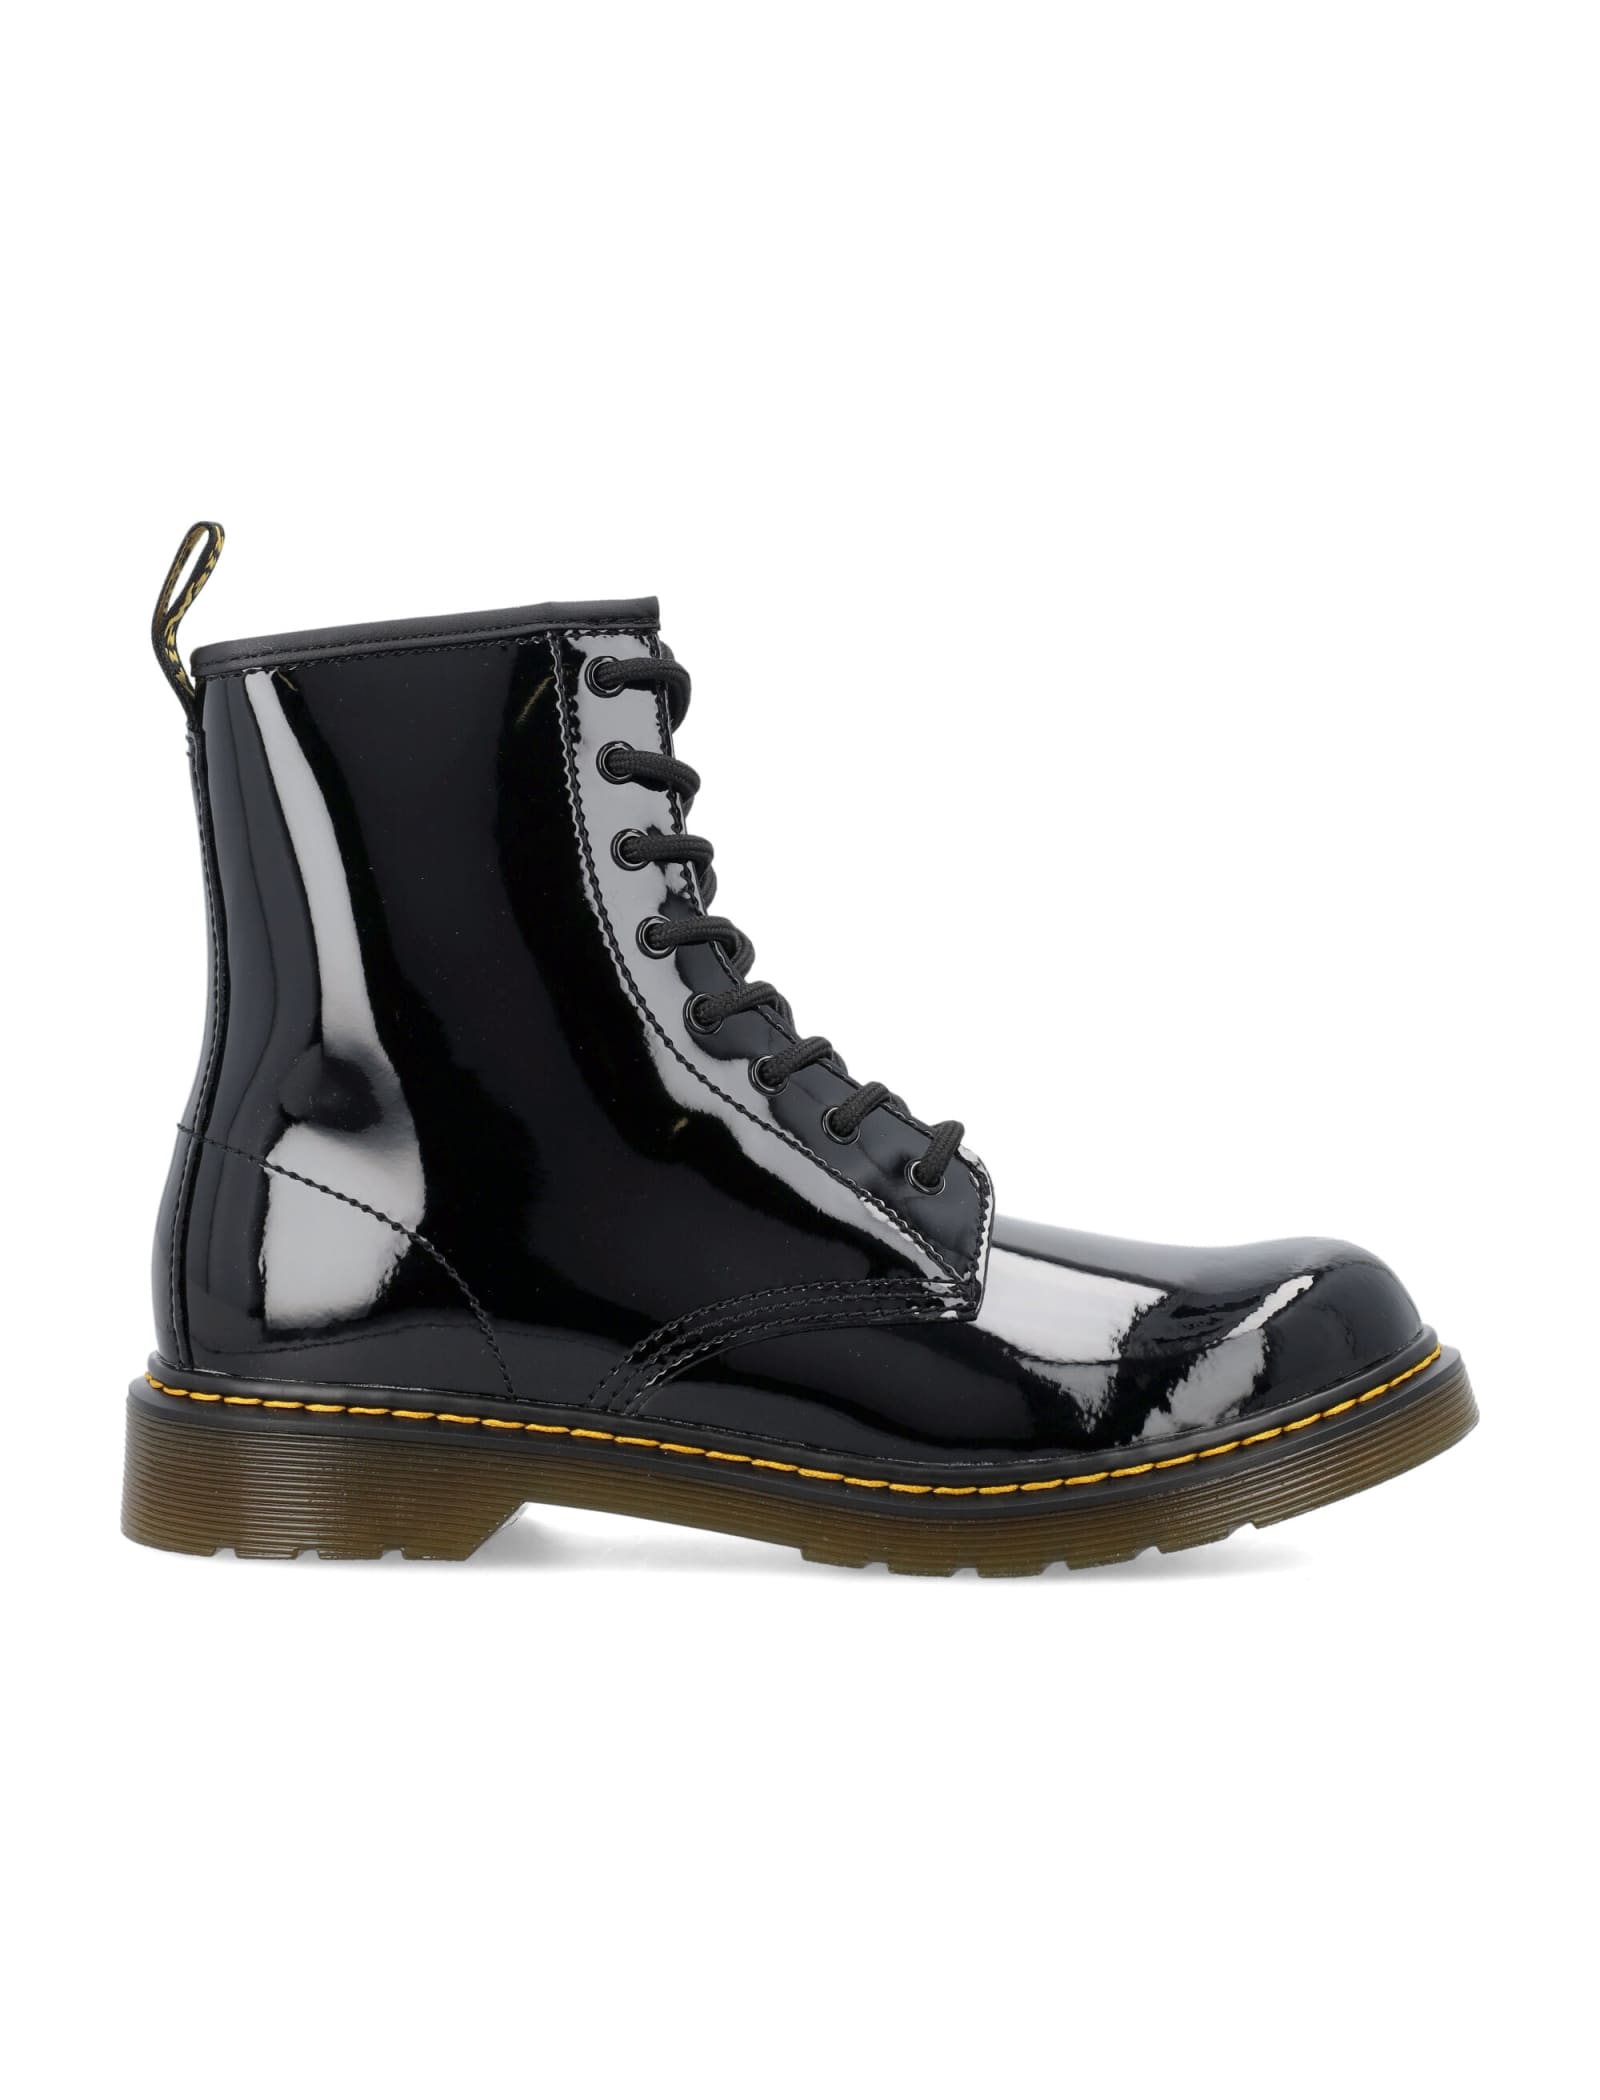 Dr. Martens Patent Leather Lace-up Boots